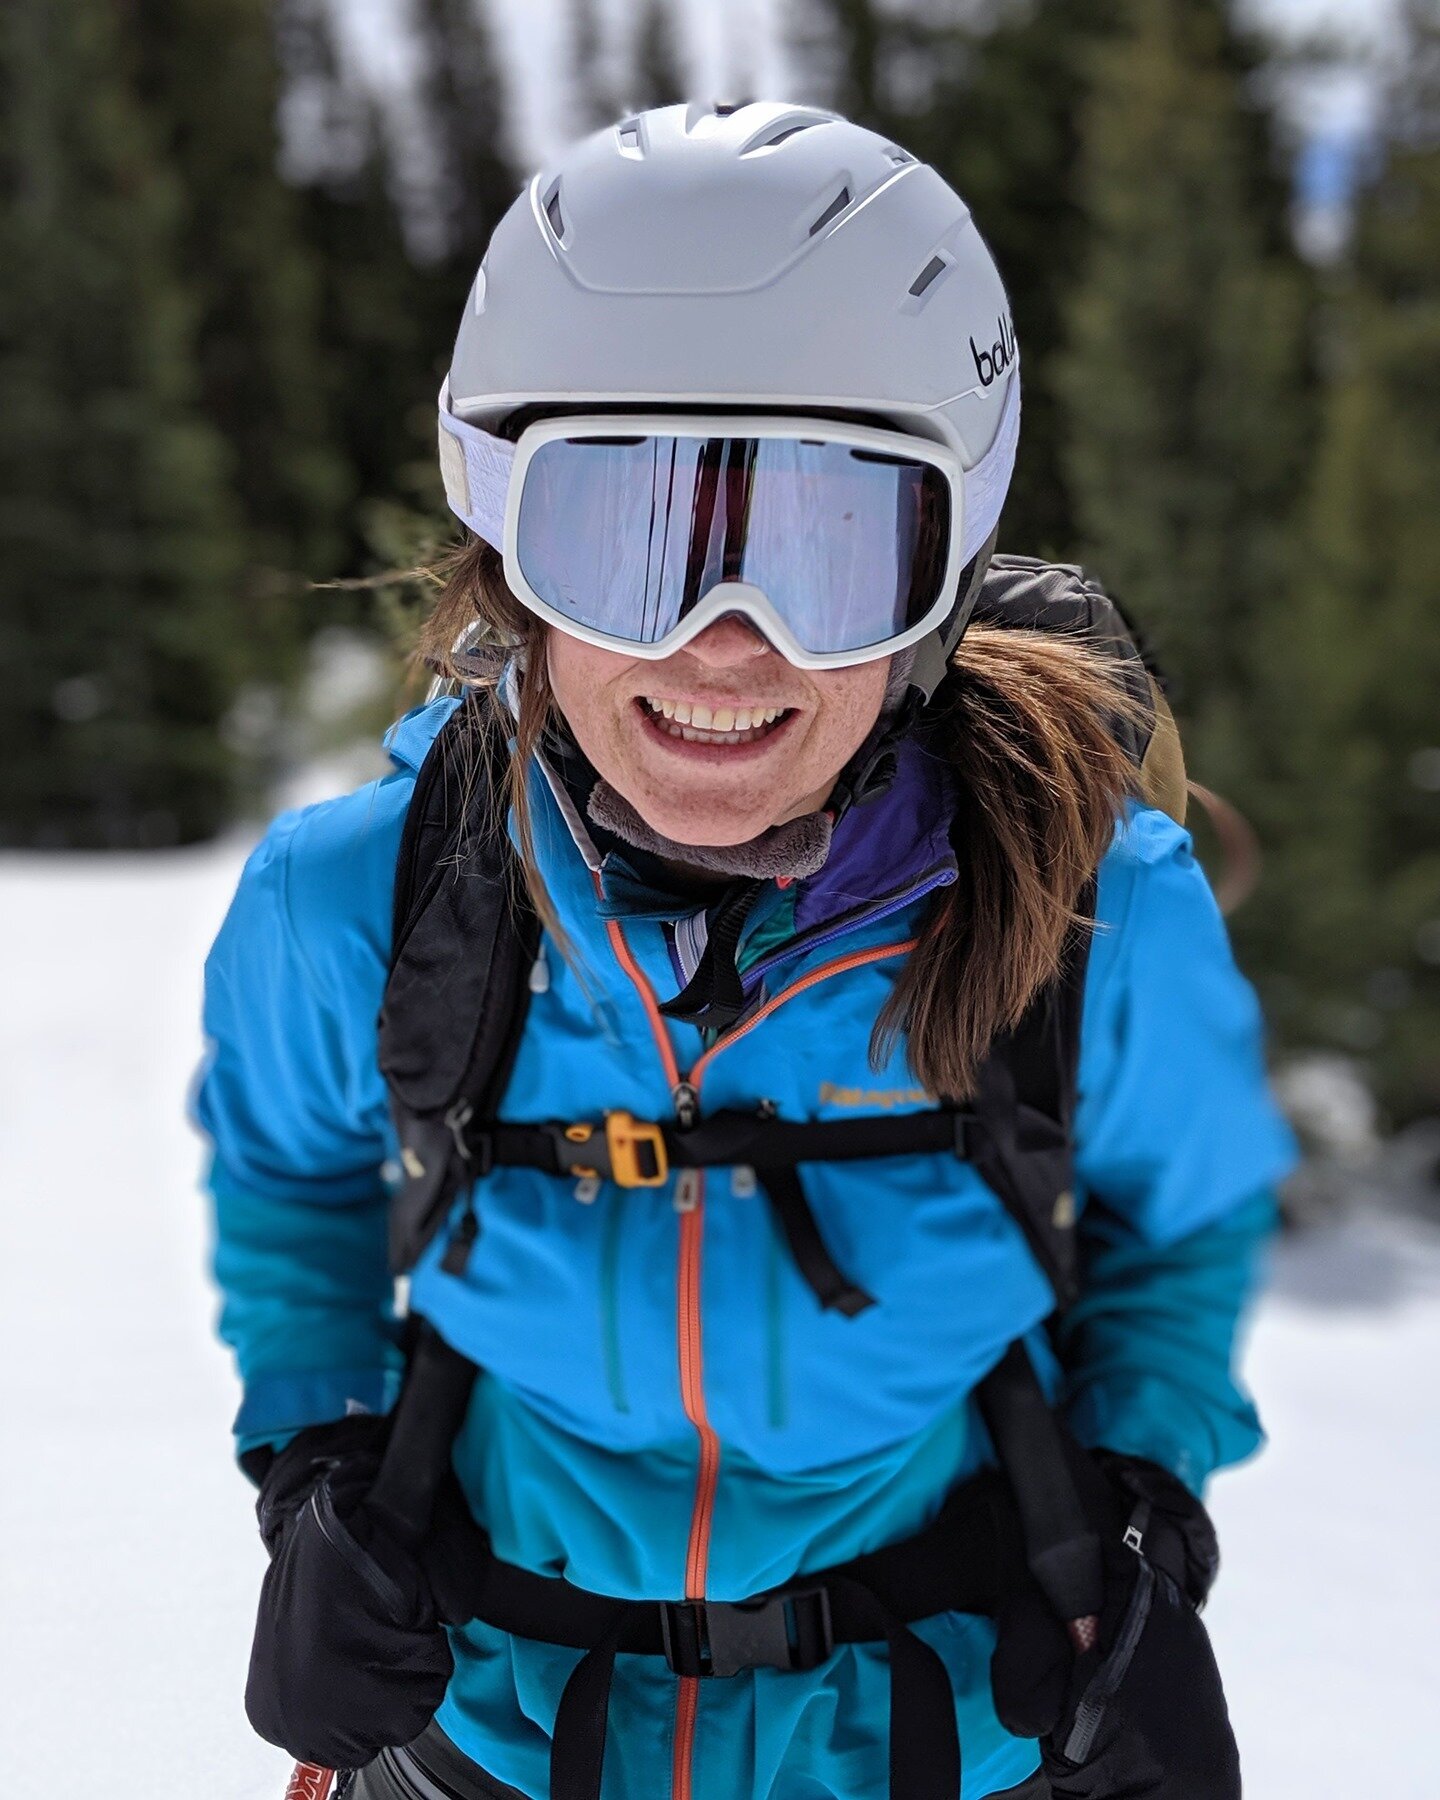 Happiest in the backcountry. Wouldn't you agree?